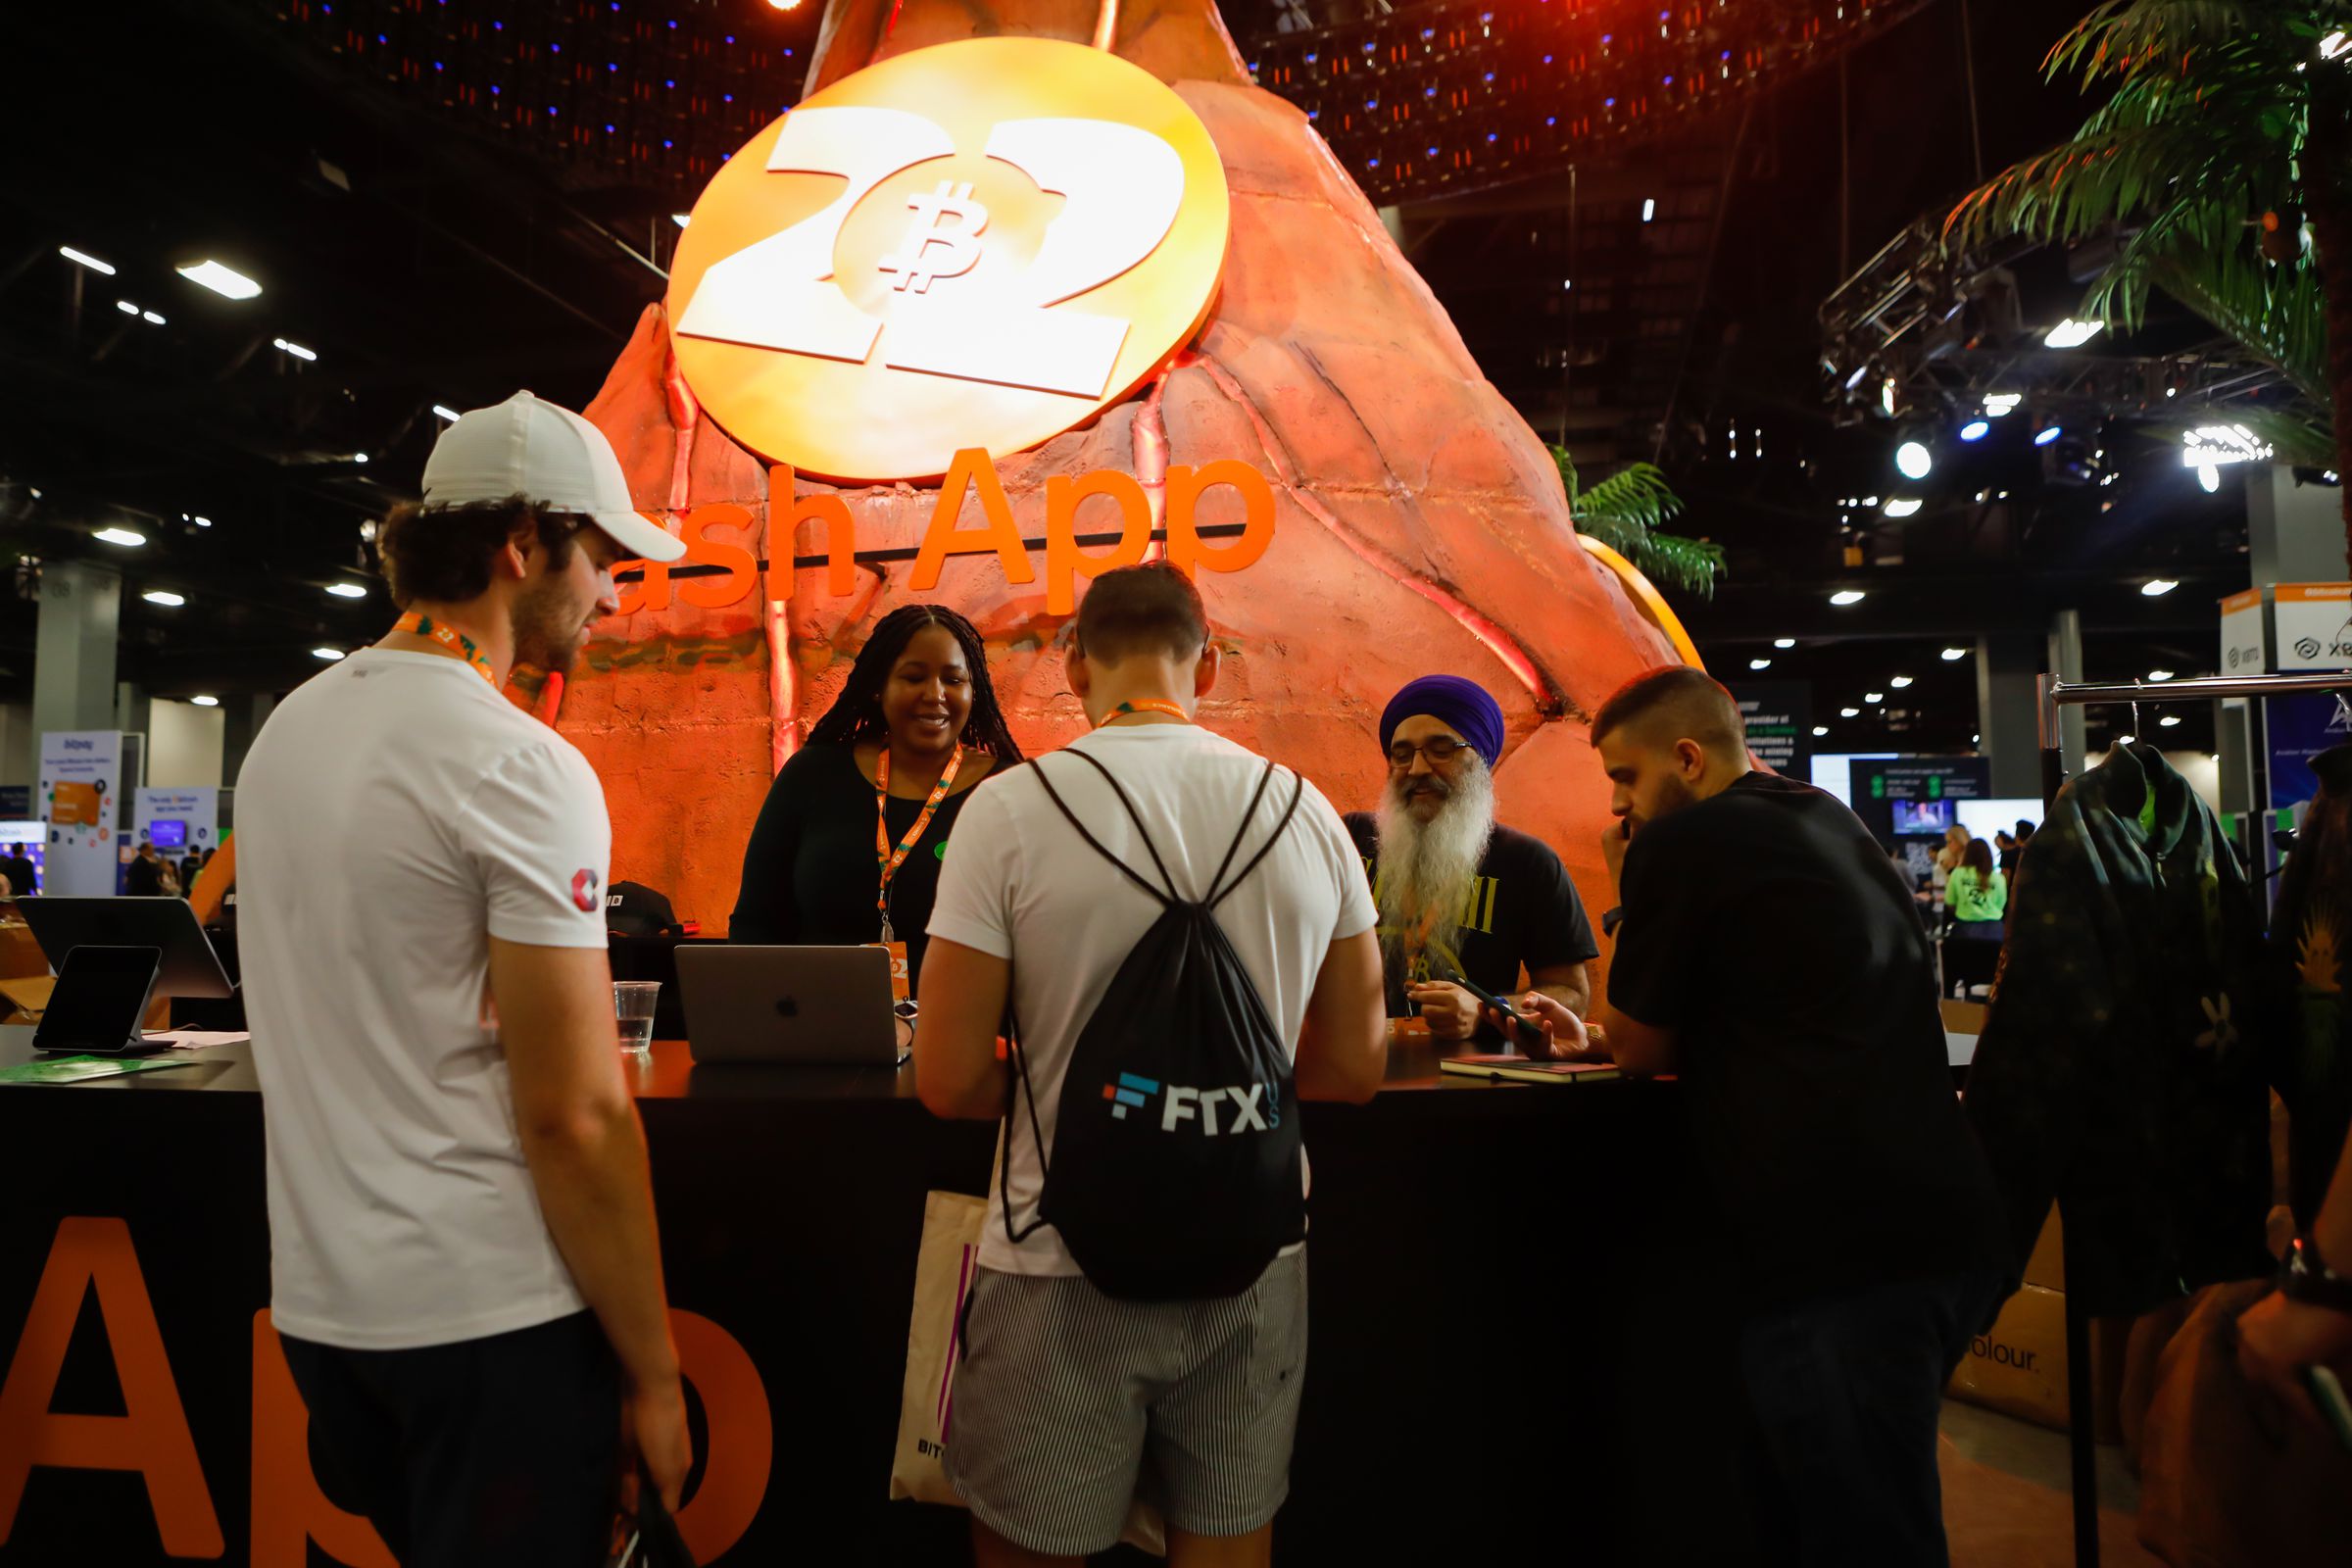 Attendees visit the Cash App stand during the Bitcoin 2022 conference in Miami, Florida, U.S., on Wednesday, April 6, 2022.